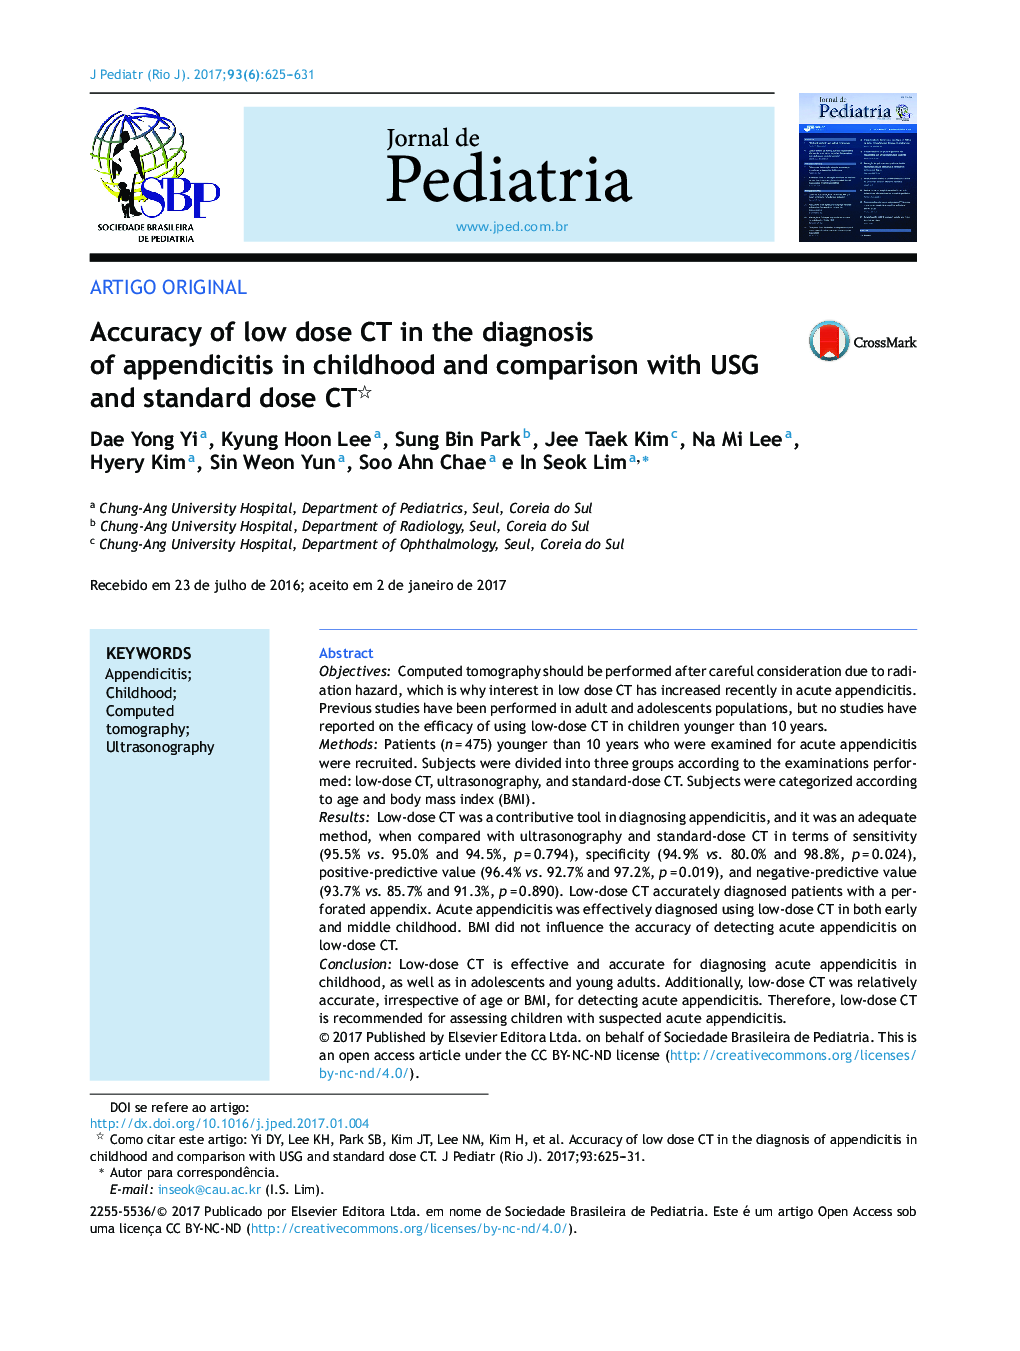 Accuracy of low dose CT in the diagnosis of appendicitis in childhood and comparison with USG and standard dose CT